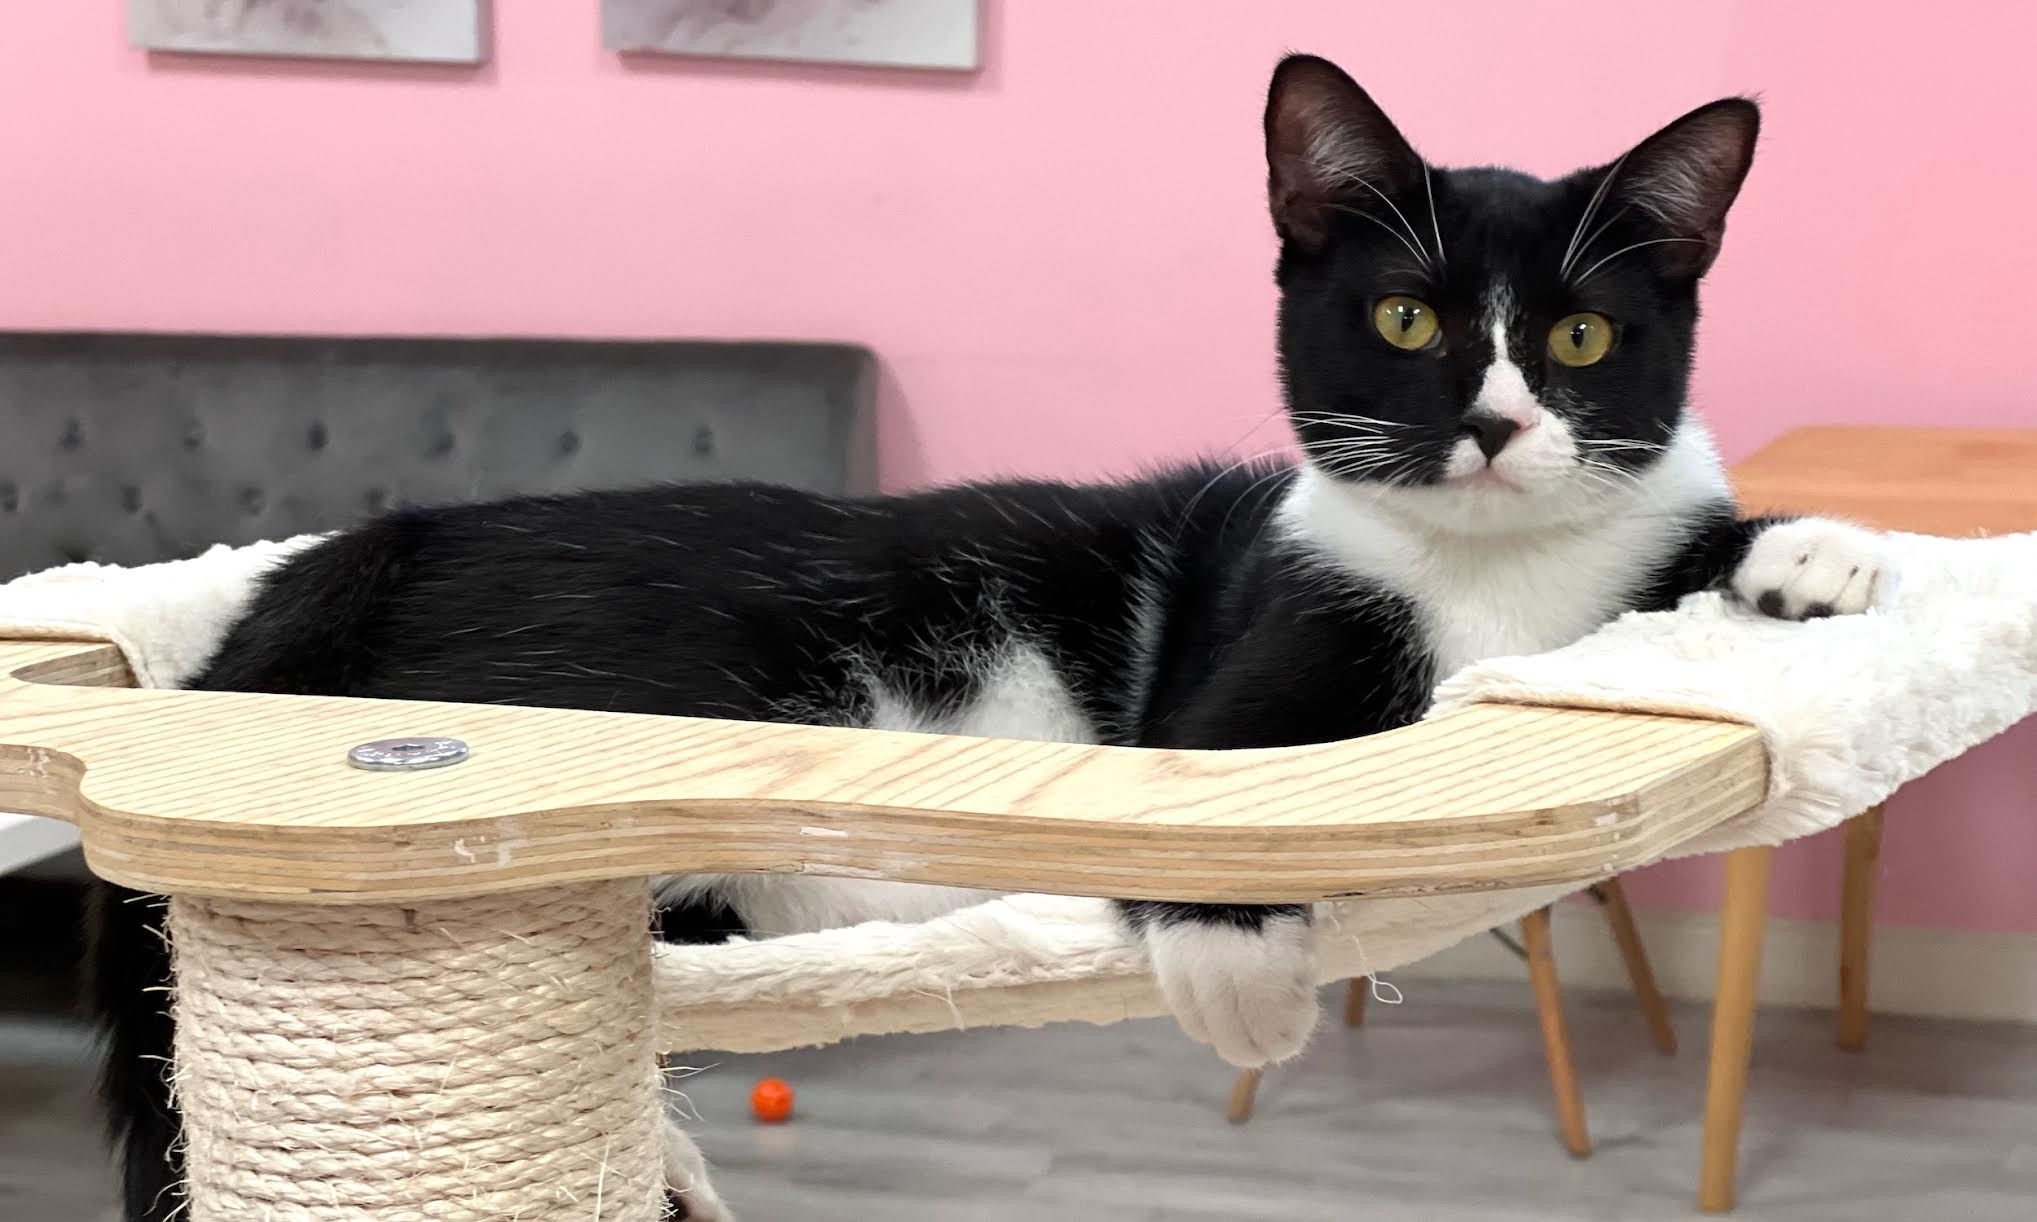 A black and white cat sitting on a cat tree